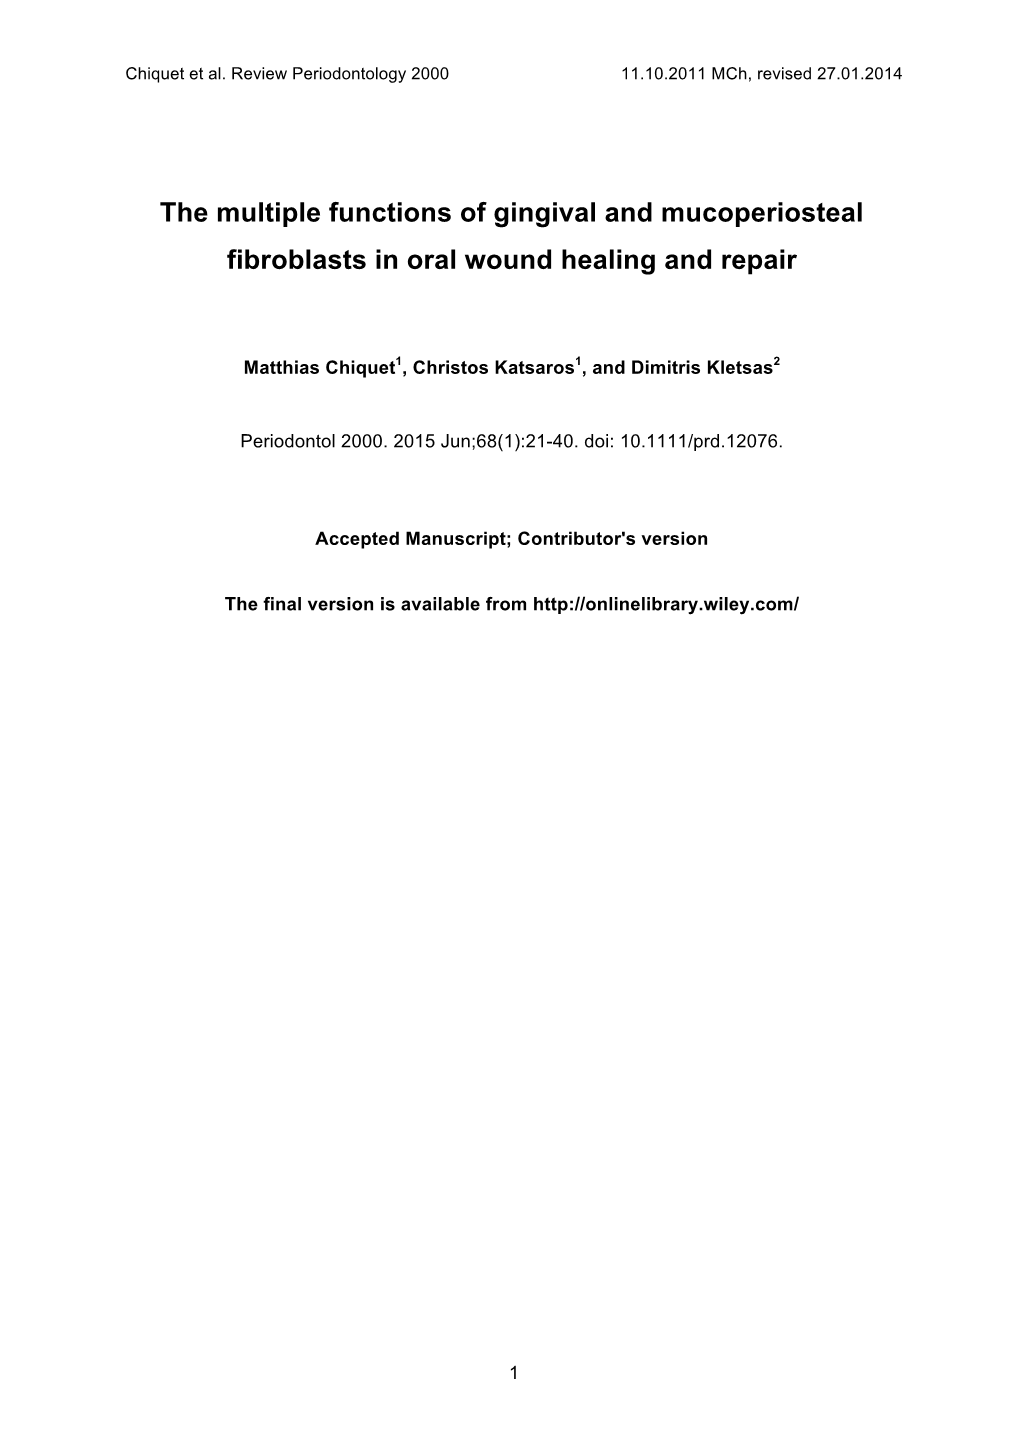 The Multiple Functions of Gingival and Mucoperiosteal Fibroblasts in Oral Wound Healing and Repair